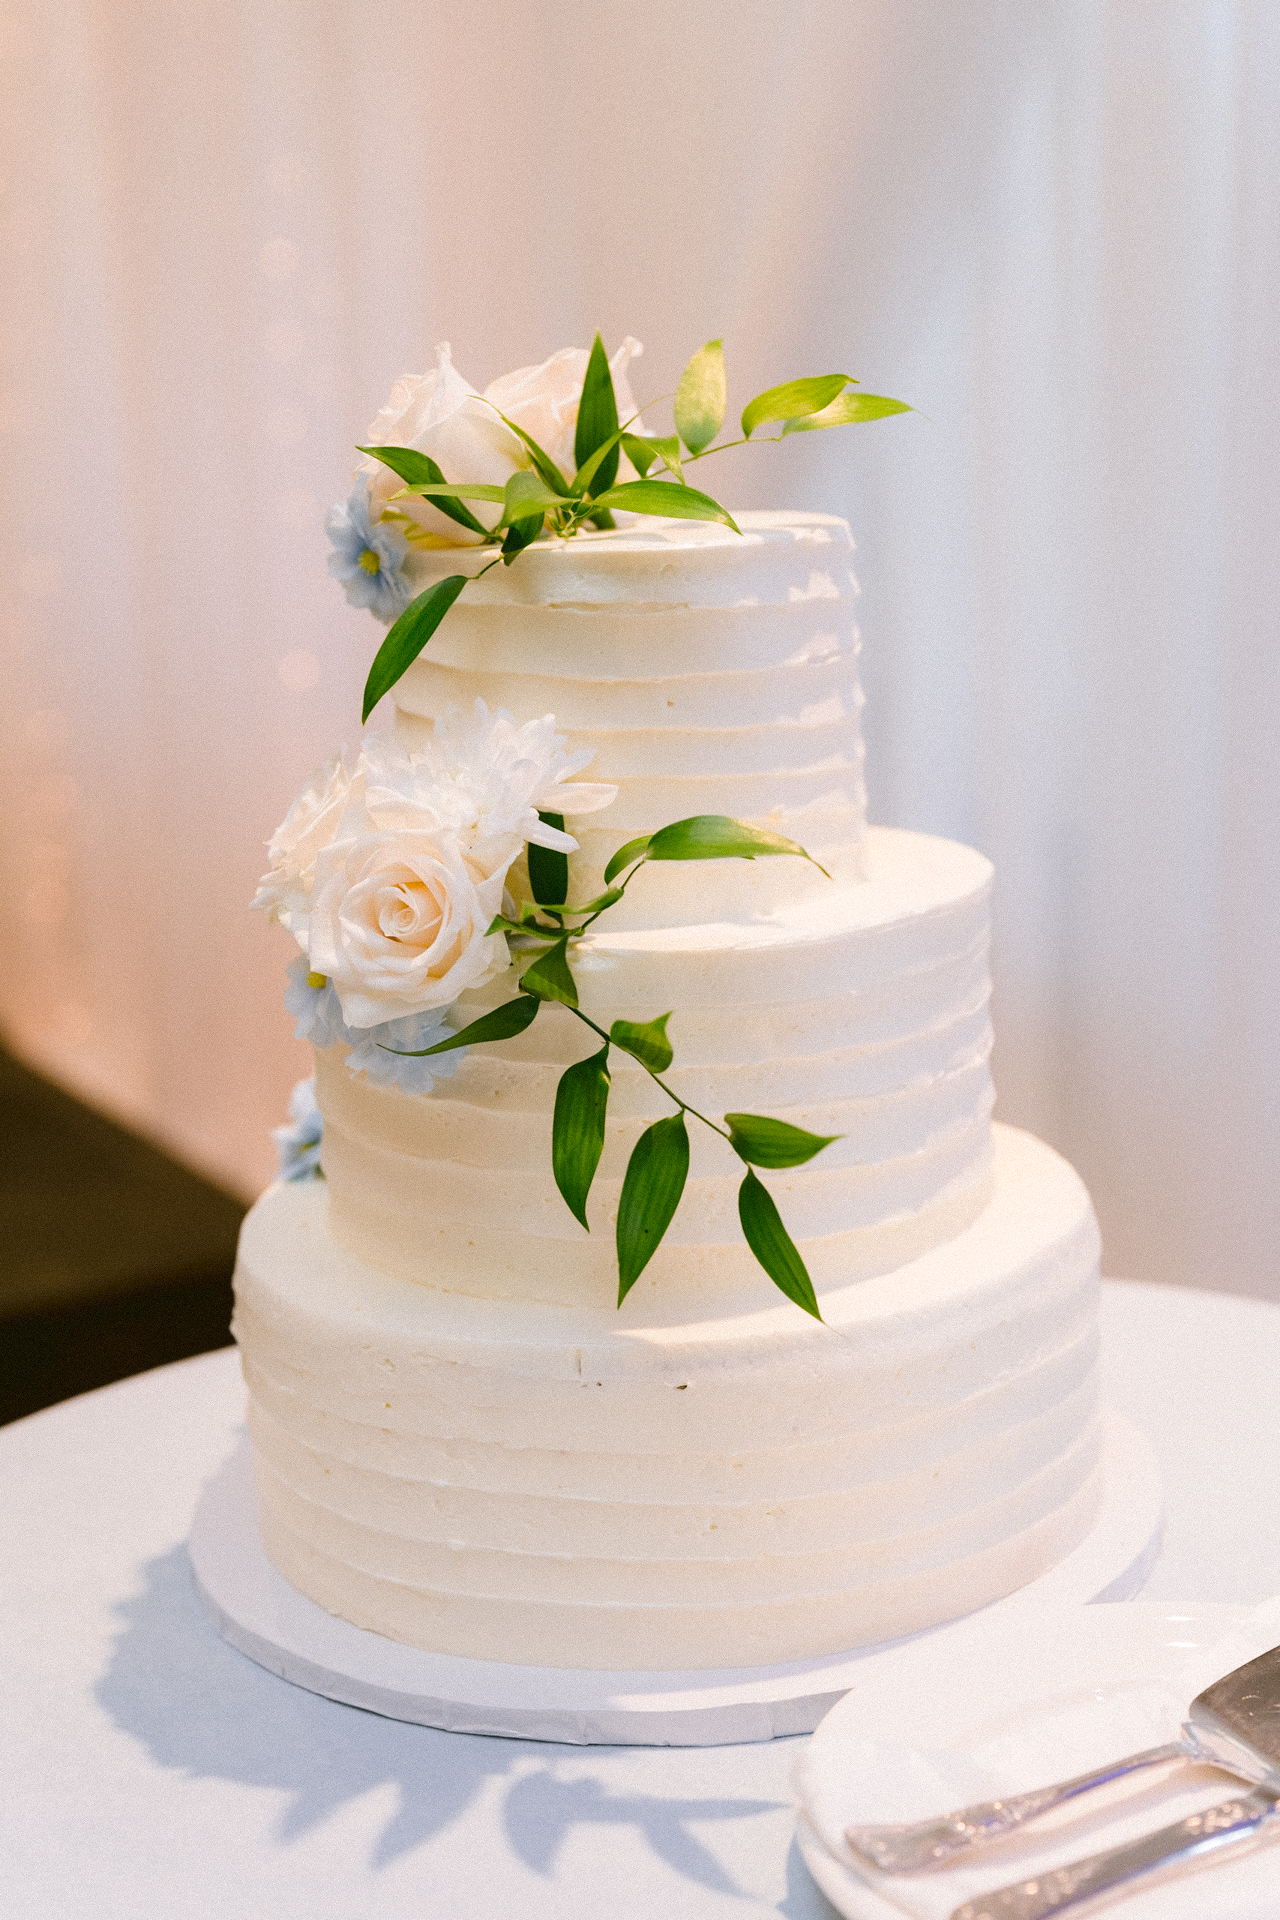 Three-tiered wedding cake adorned with white flowers and green leaves, displayed on a table.